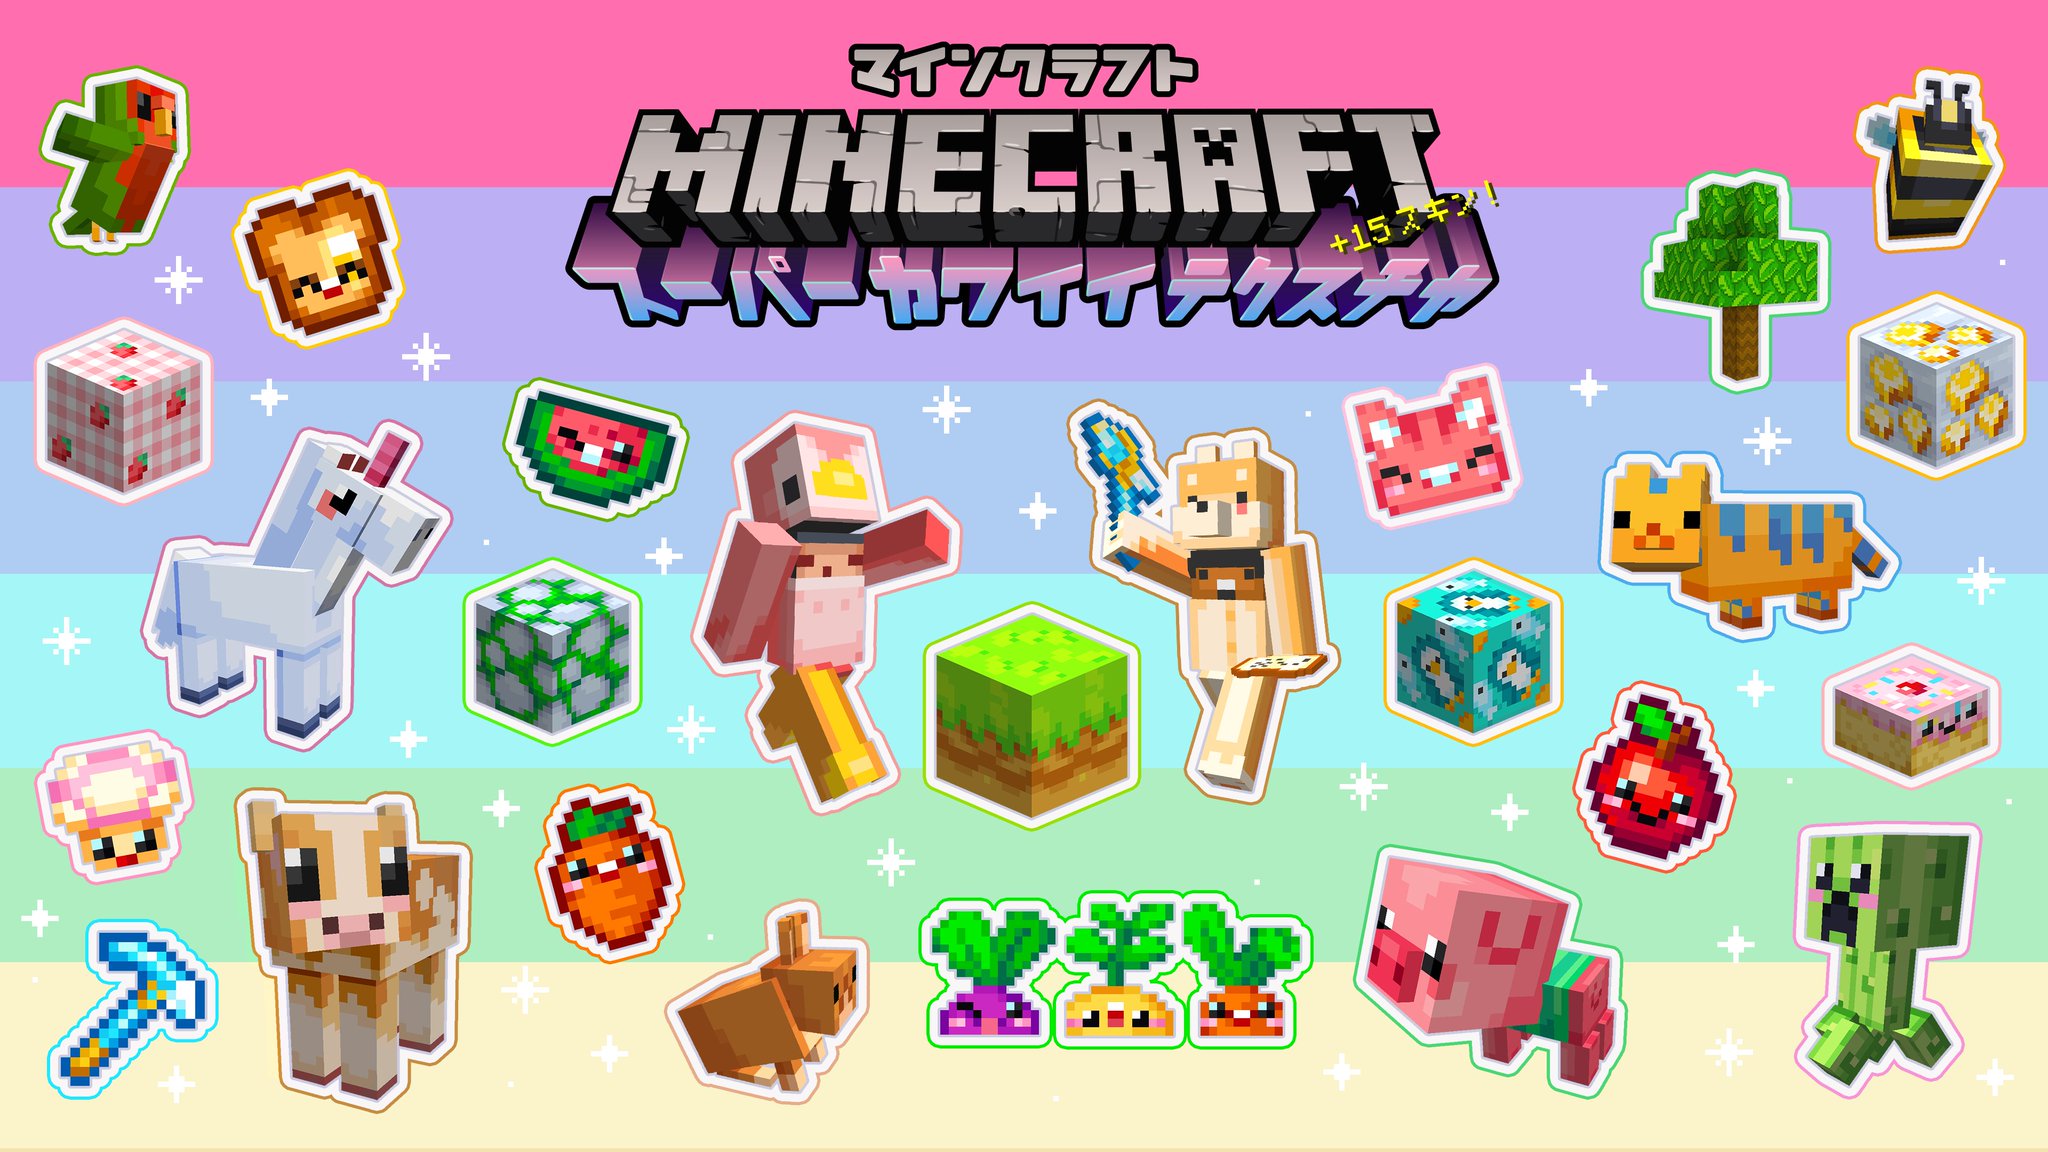 Minecraft on Twitter: "The Super Cute Texture Pack is out 